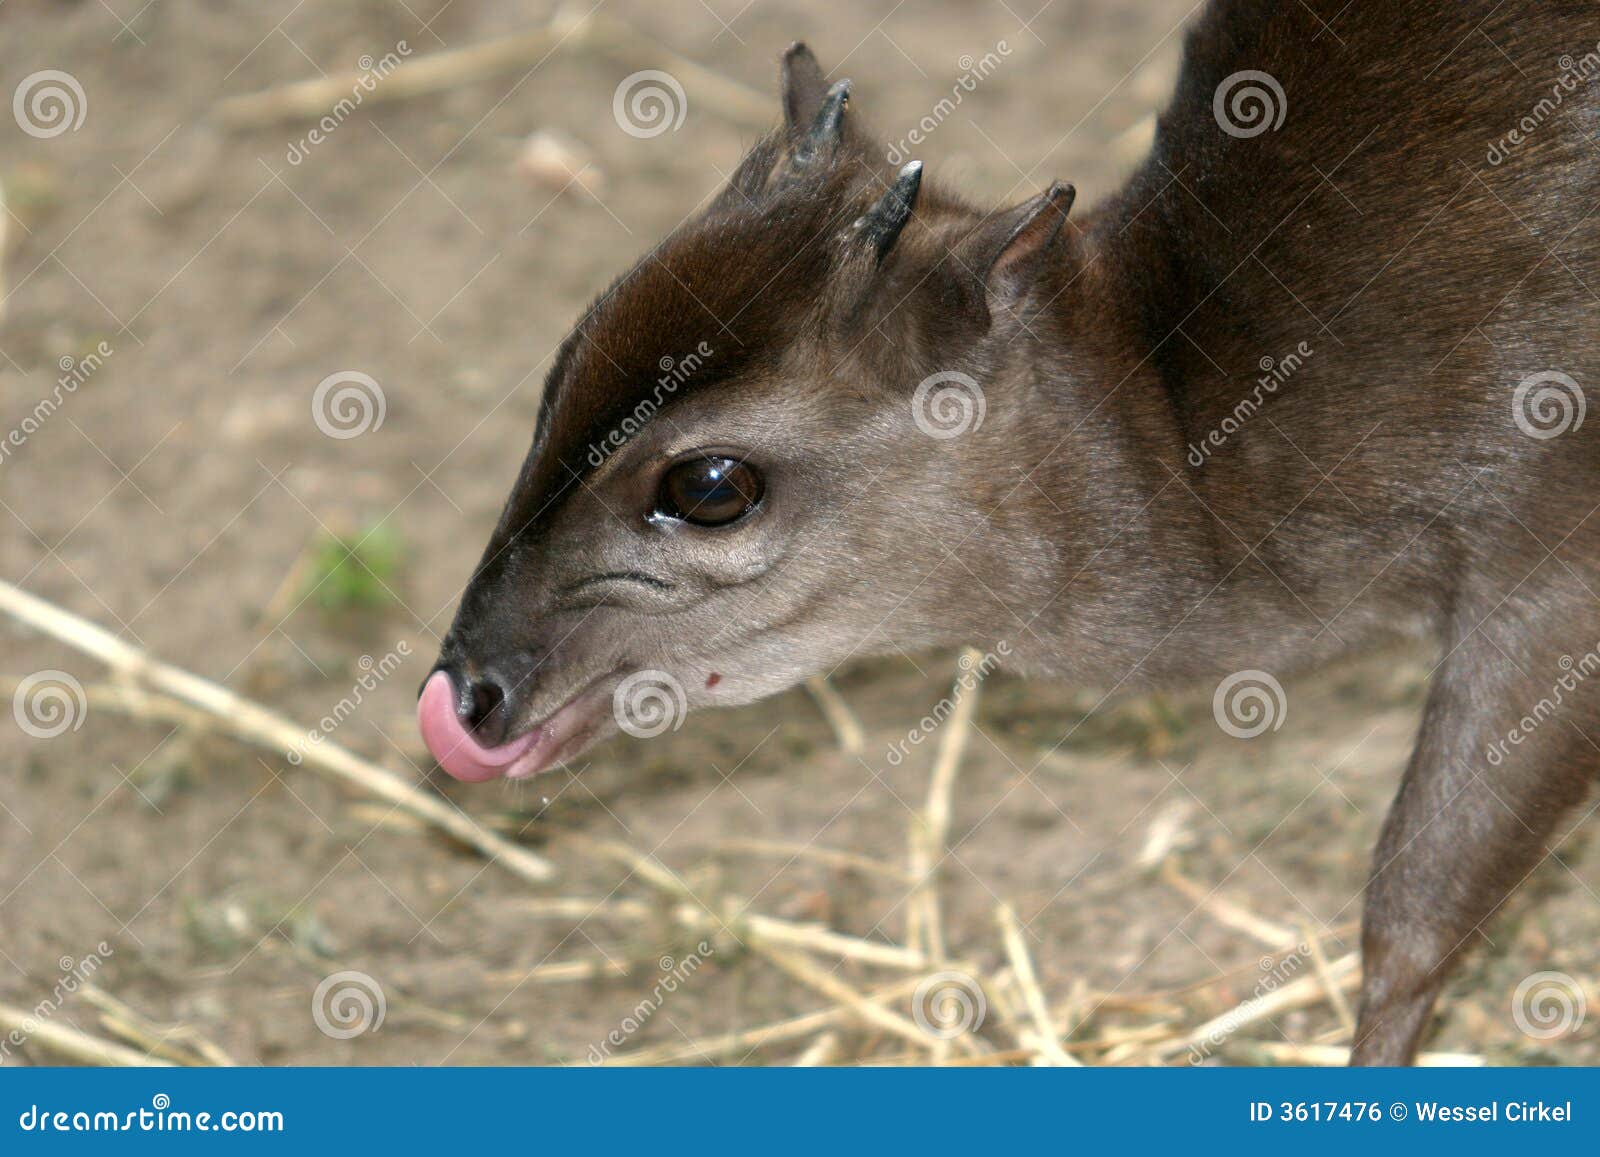 blue duiker is licking his nose